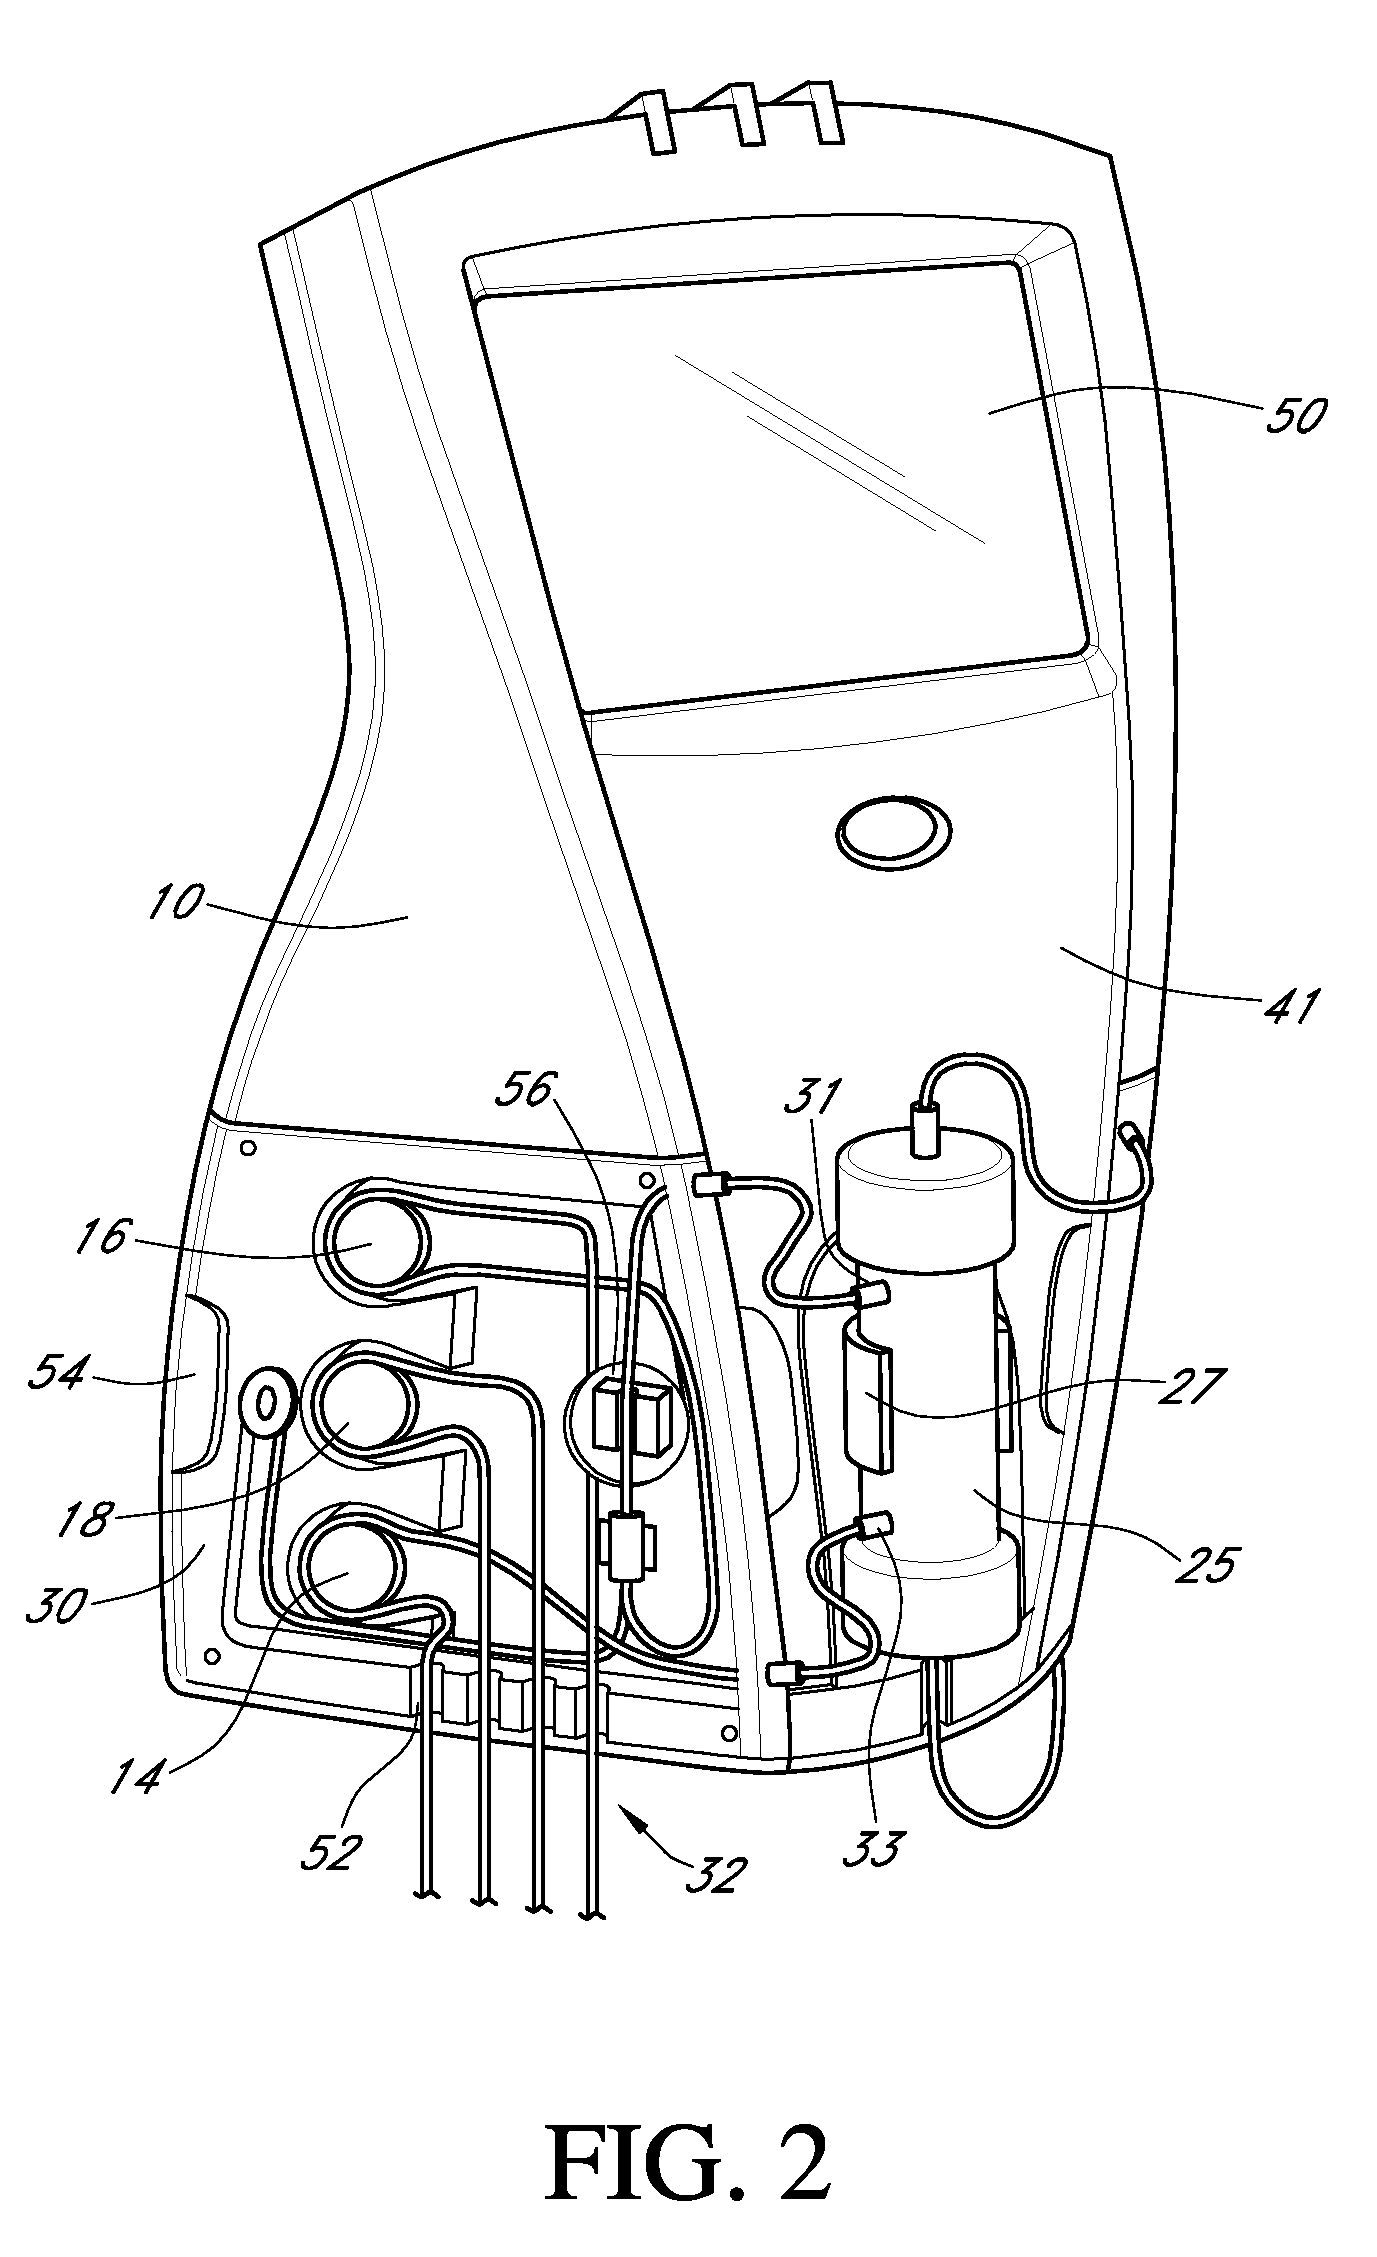 Modular hemofiltration apparatus with removable panels for multiple and alternate blood therapy